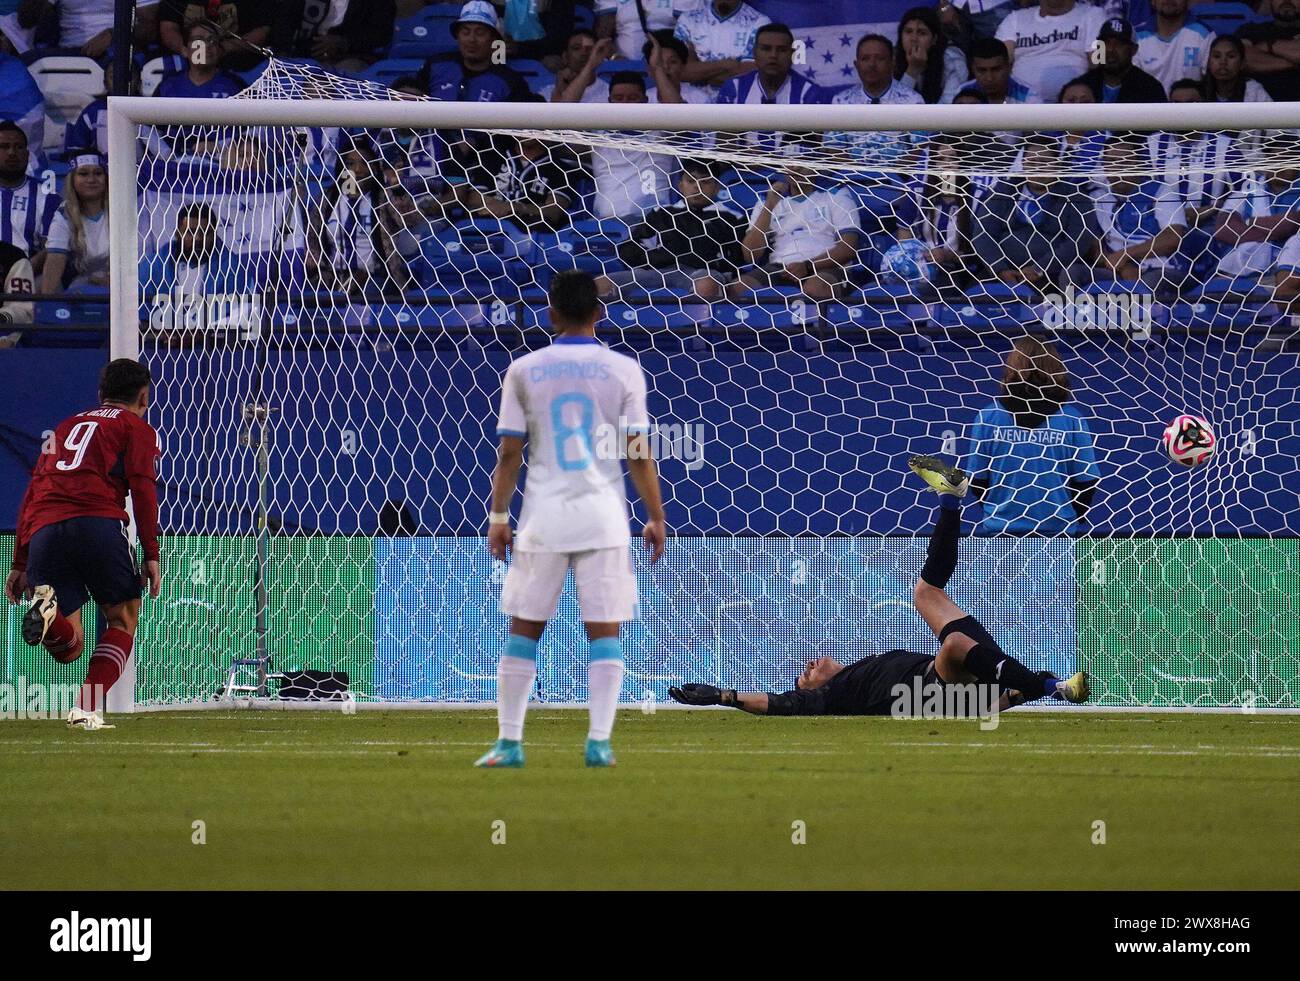 Arlington, United States. 23rd Mar, 2024. March 23, 2024, Frisco, Texas: Goalkeeper Jonathan Rougier #18 of Honduras concedes a goal to Manfred Ugalde #9 of Costa Rica during Play-In Concacaf Nations League match between Costa Rica and Honduras at Toyota Stadium. Jamaica won 1-0. on March 23, 2024, Frisco, Texas. (Photo by Javier Vicencio/Eyepix Group/Sipa USA) Credit: Sipa USA/Alamy Live News Stock Photo